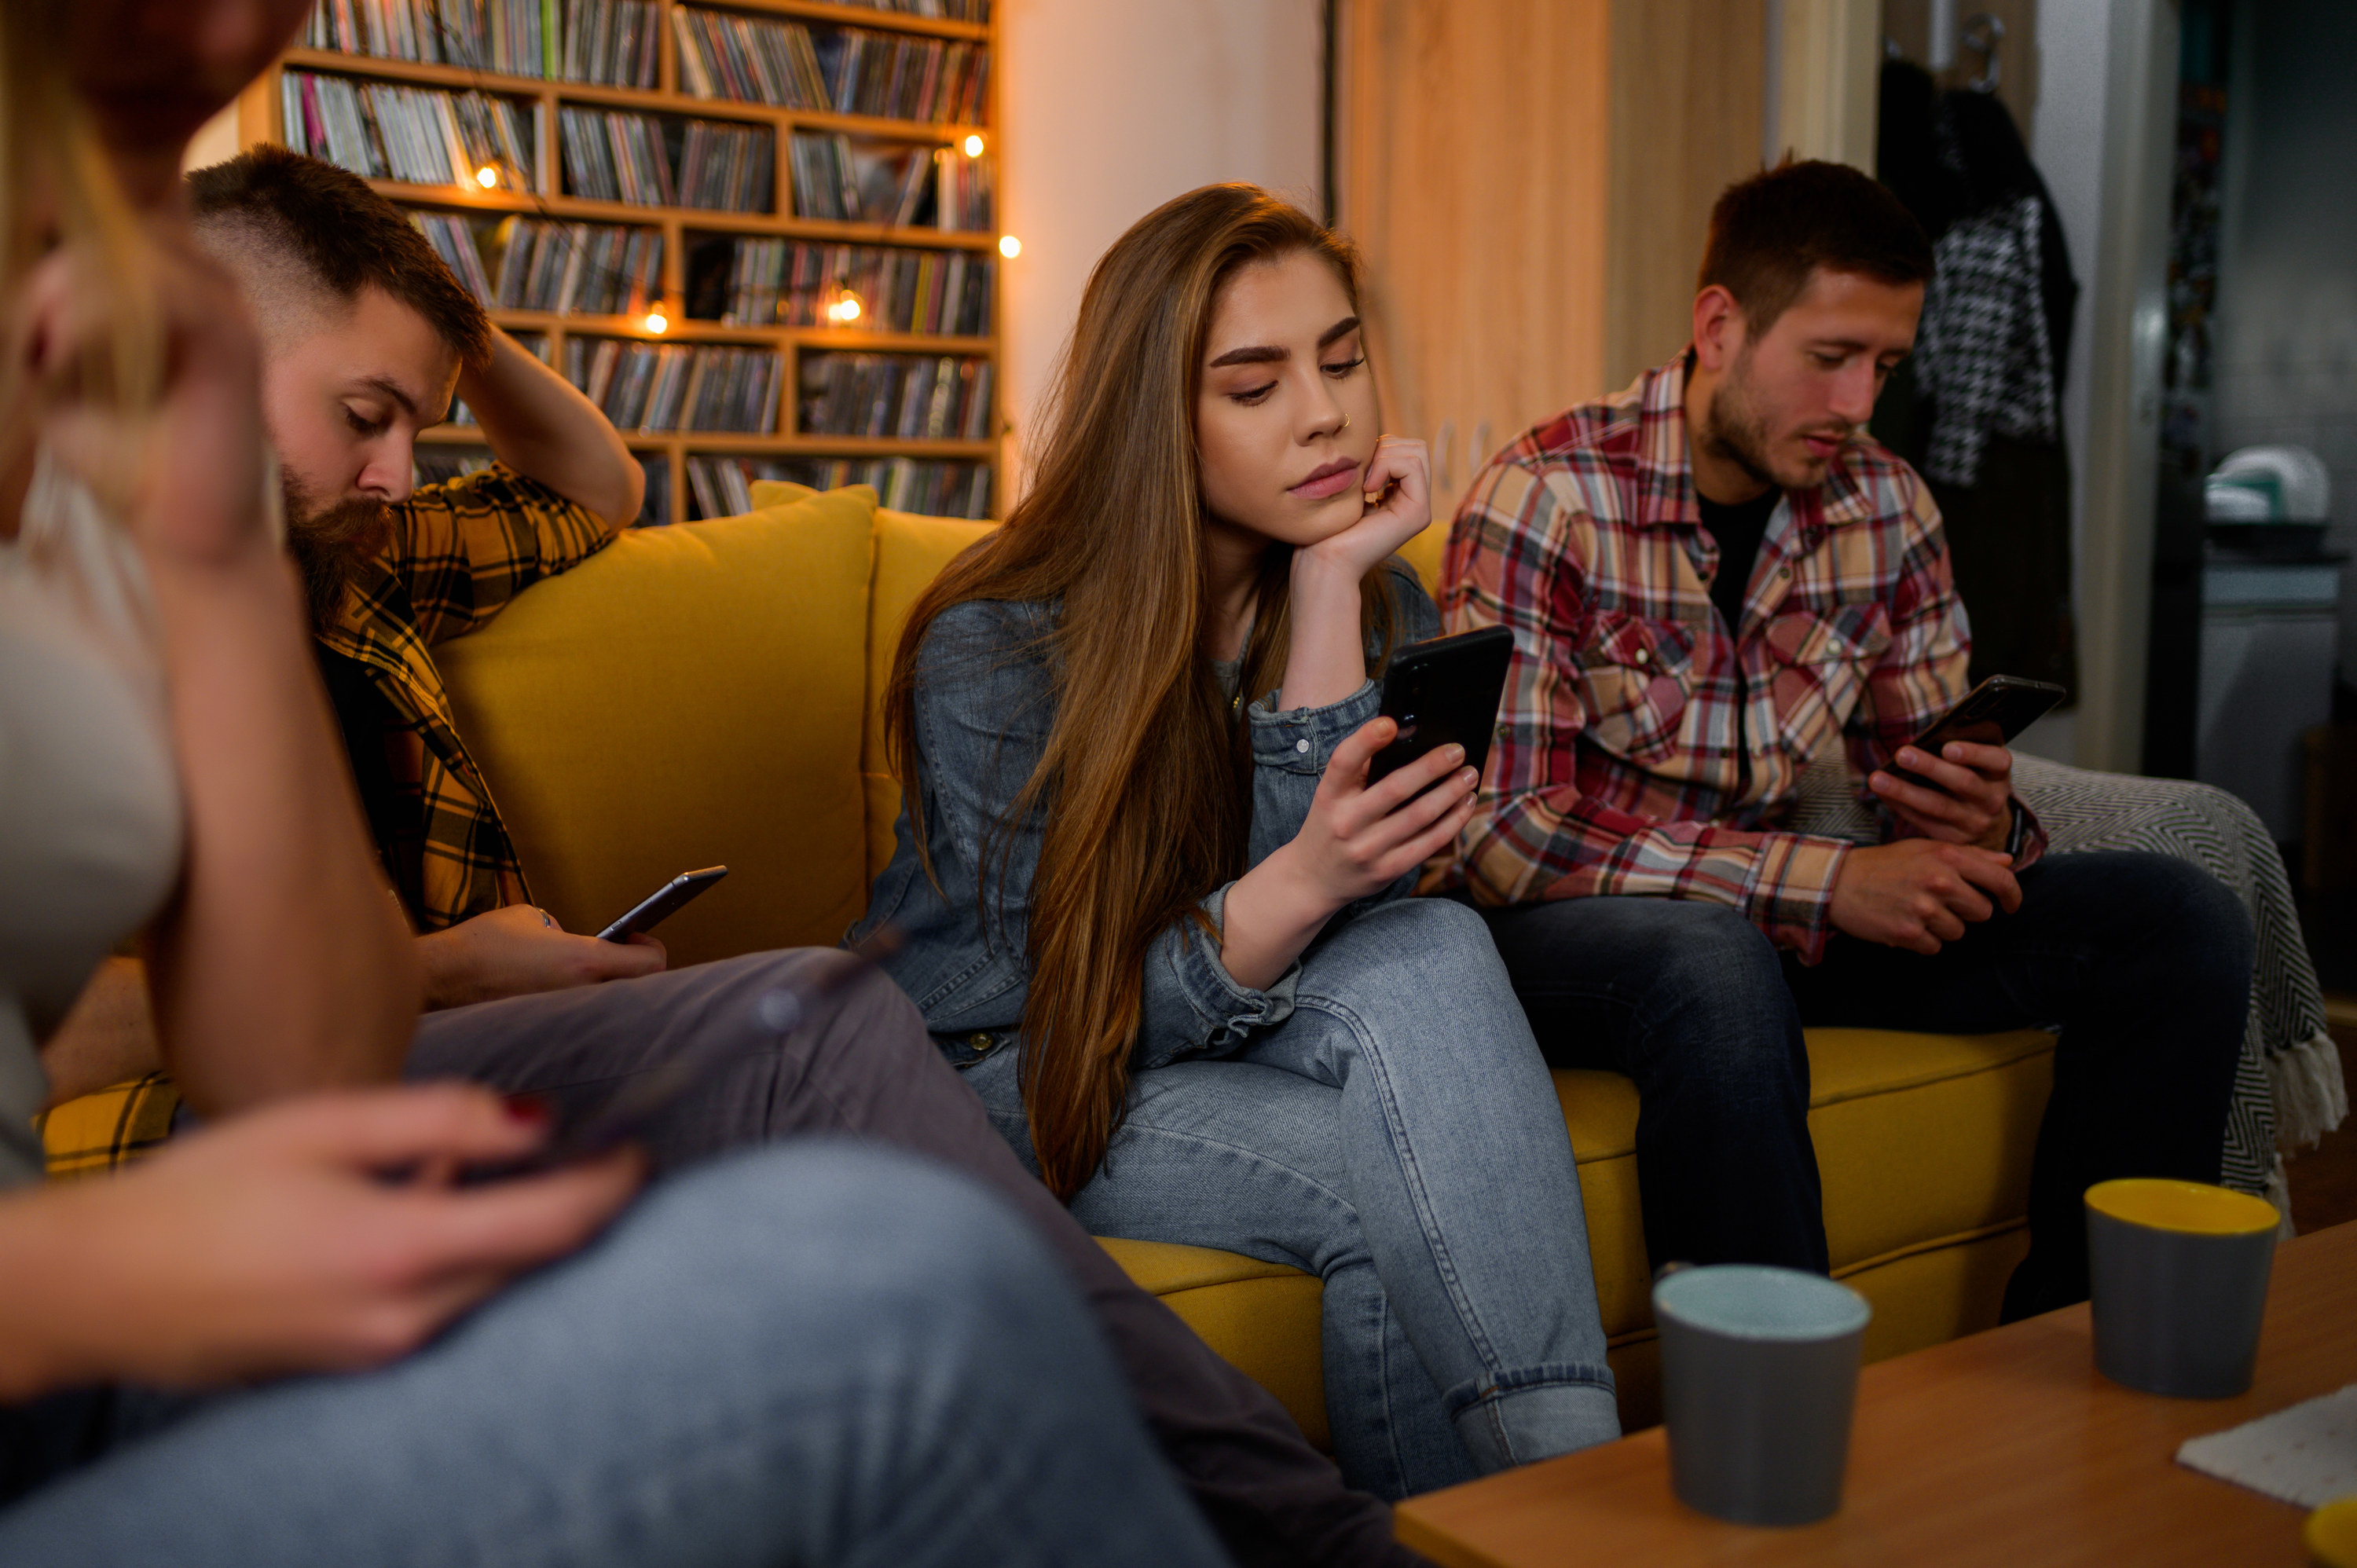 A girl looking sad at her phone sitting on the couch surrounded by people